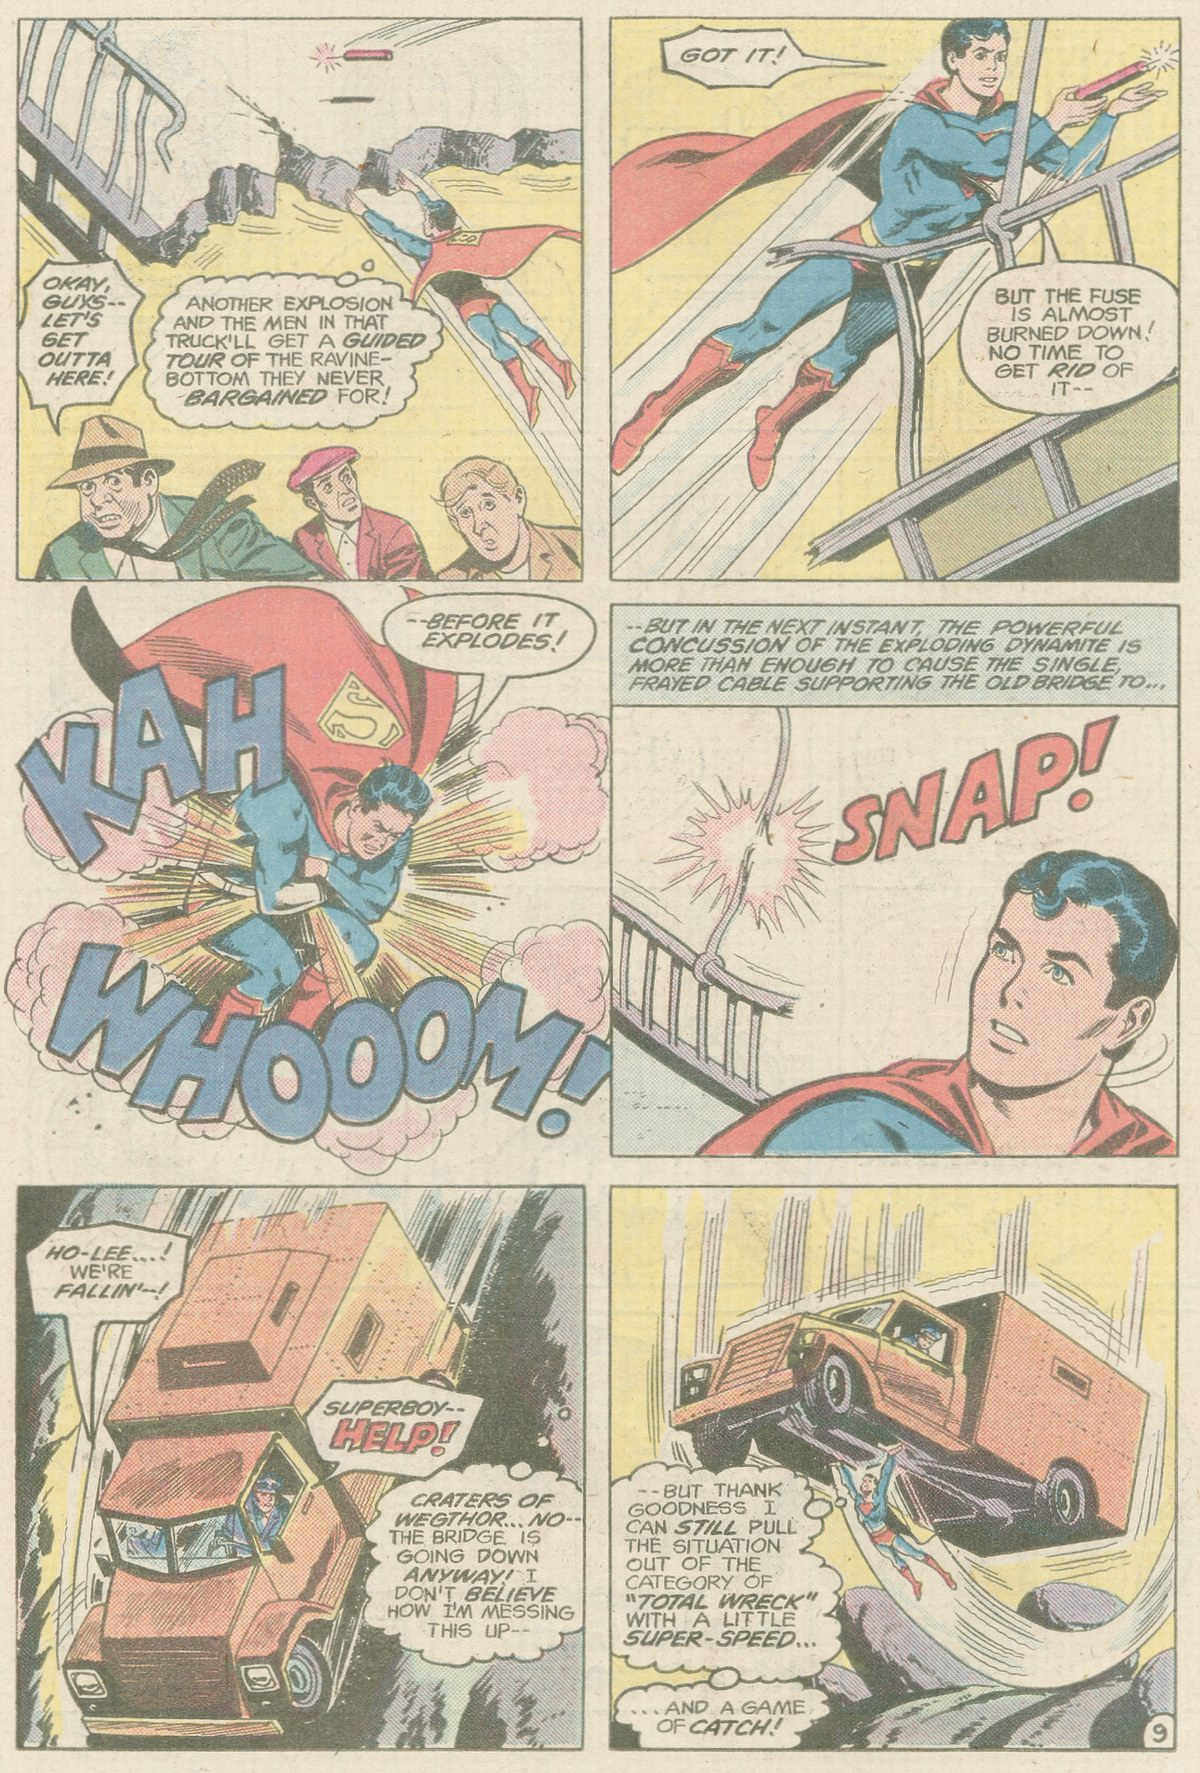 The New Adventures of Superboy 40 Page 9